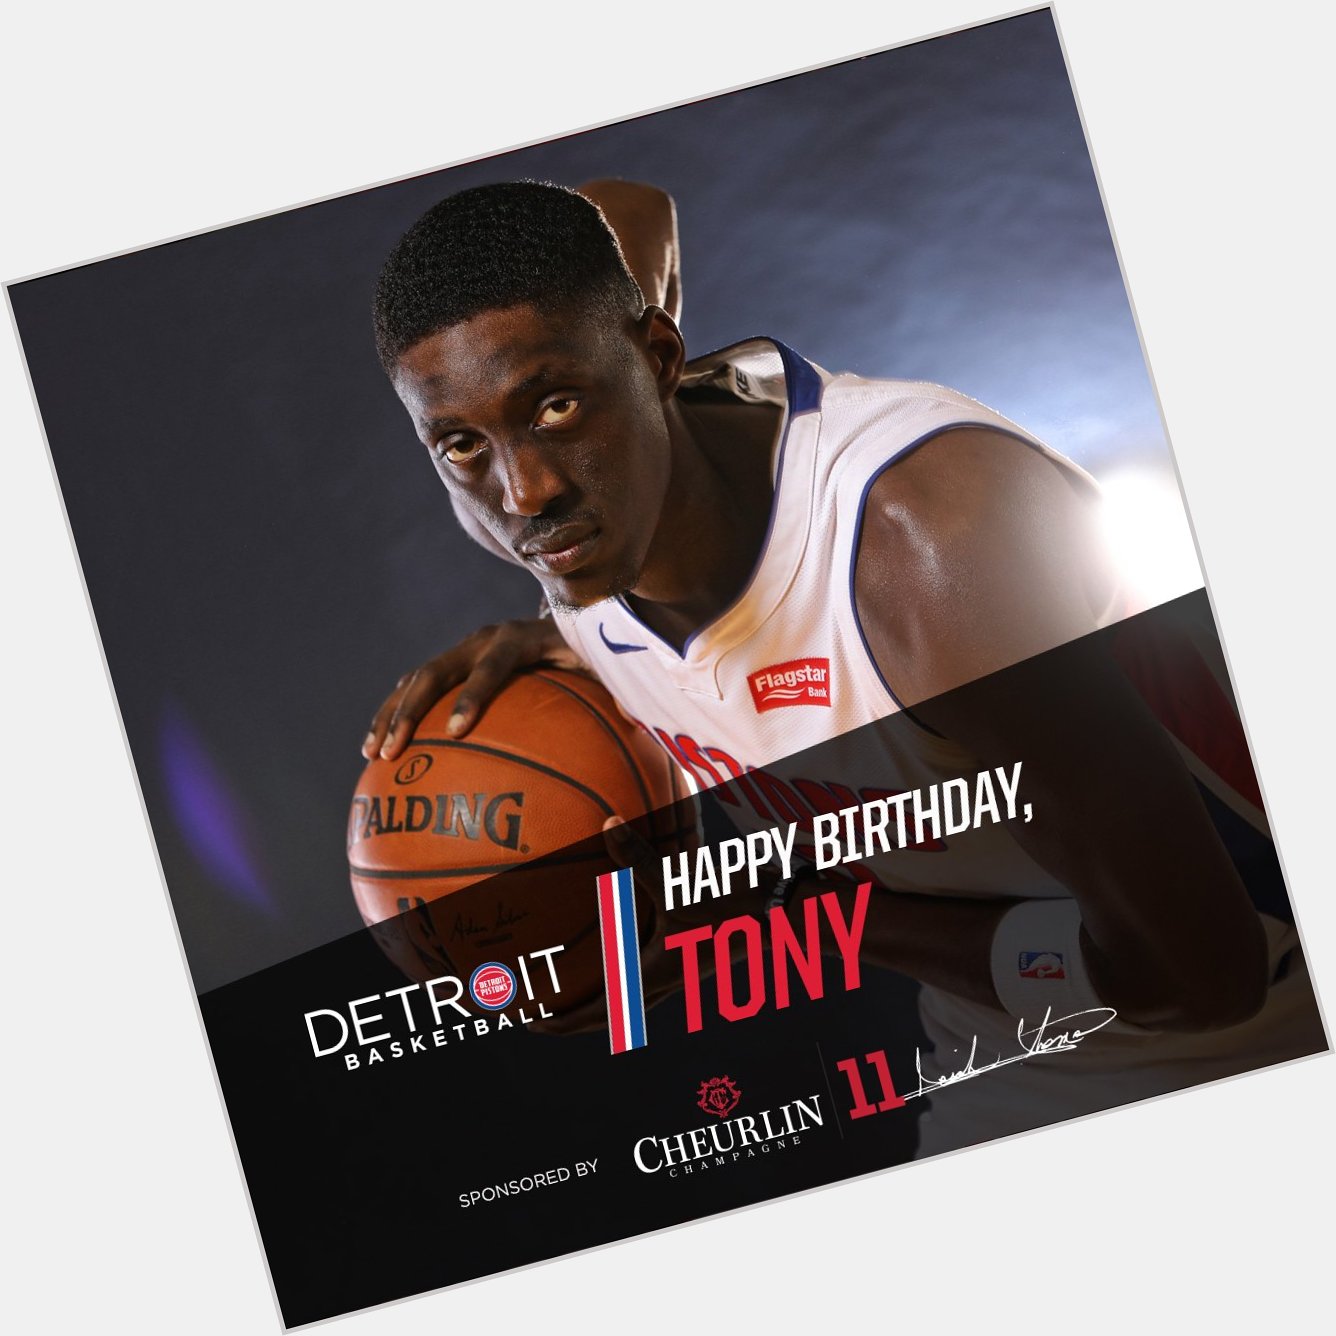 The and wish our guy Tony Snell a very Happy Birthday!   